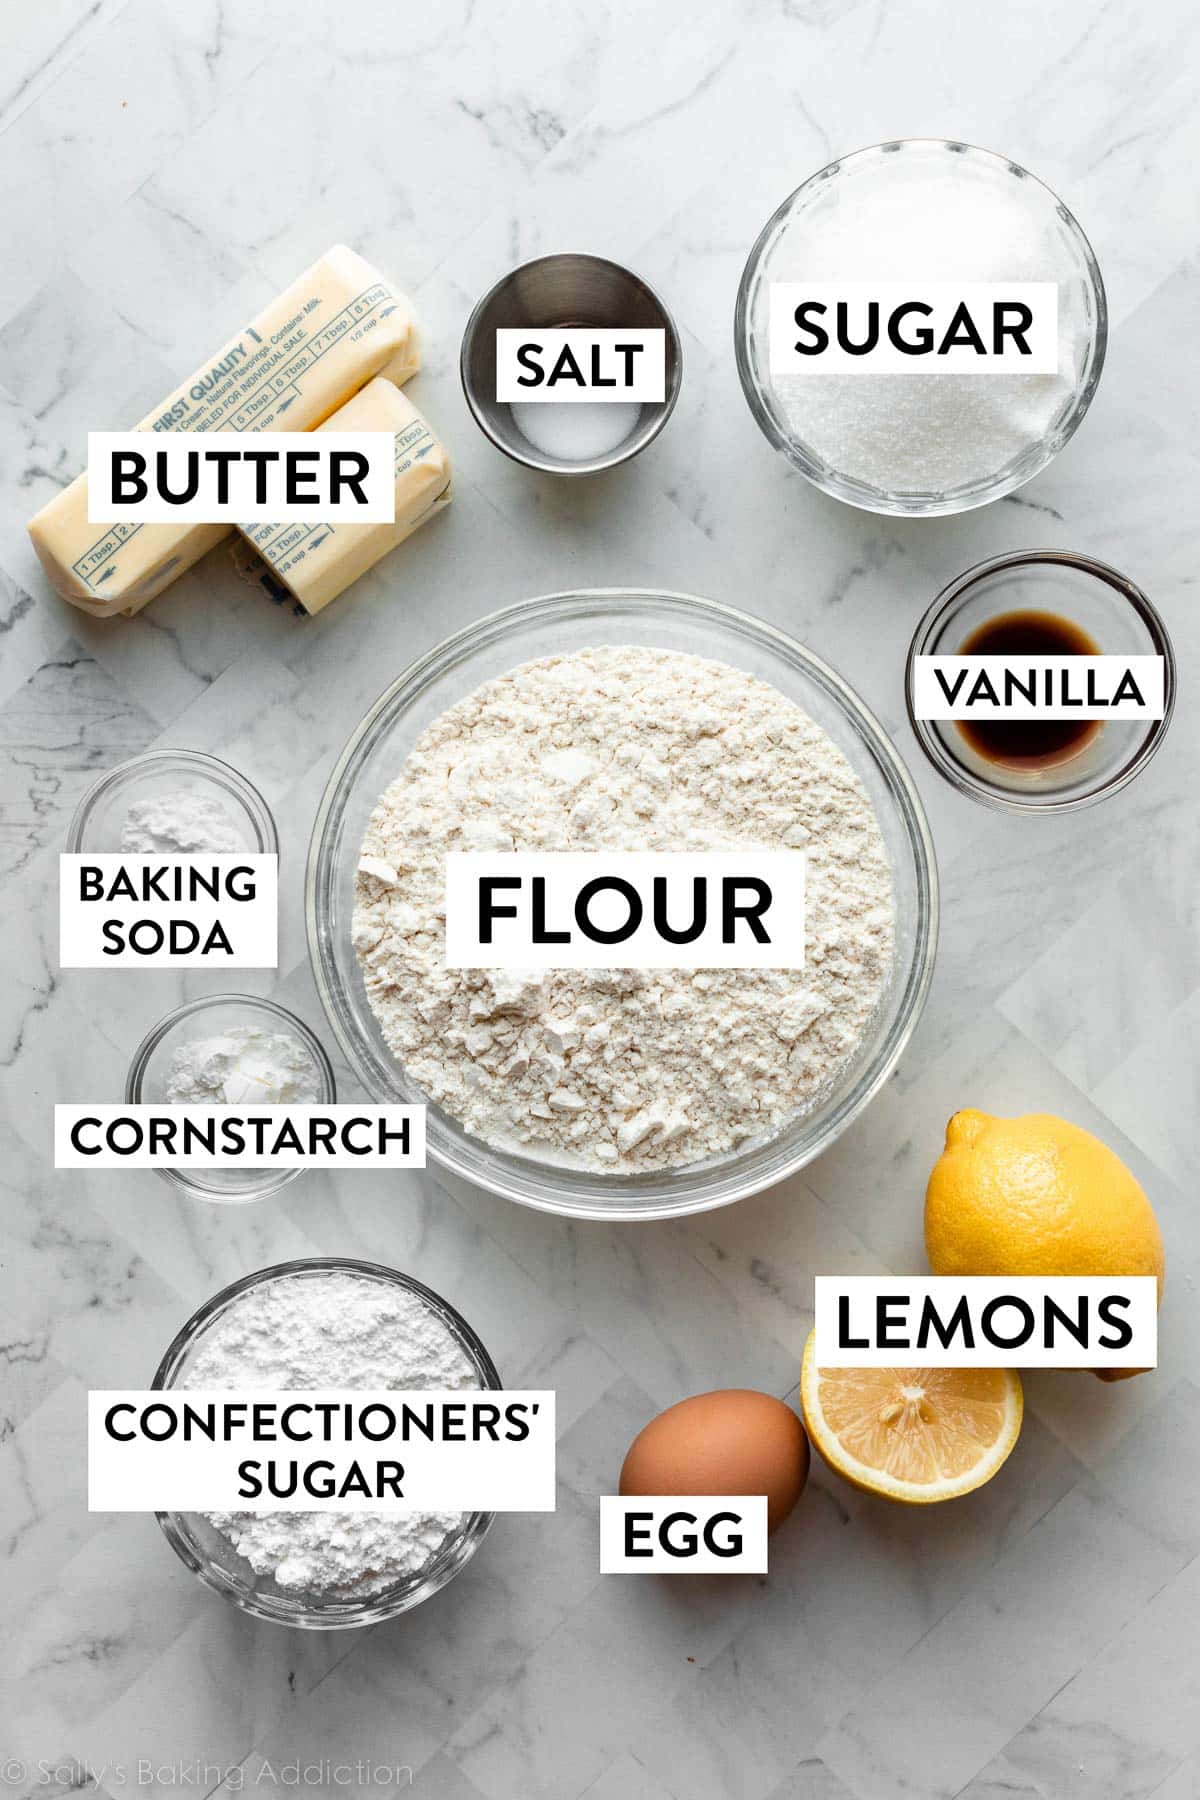 ingredients on marble counter including egg, one and 1/2 lemons, big bowl of flour, sugar, butter, and other ingredients.